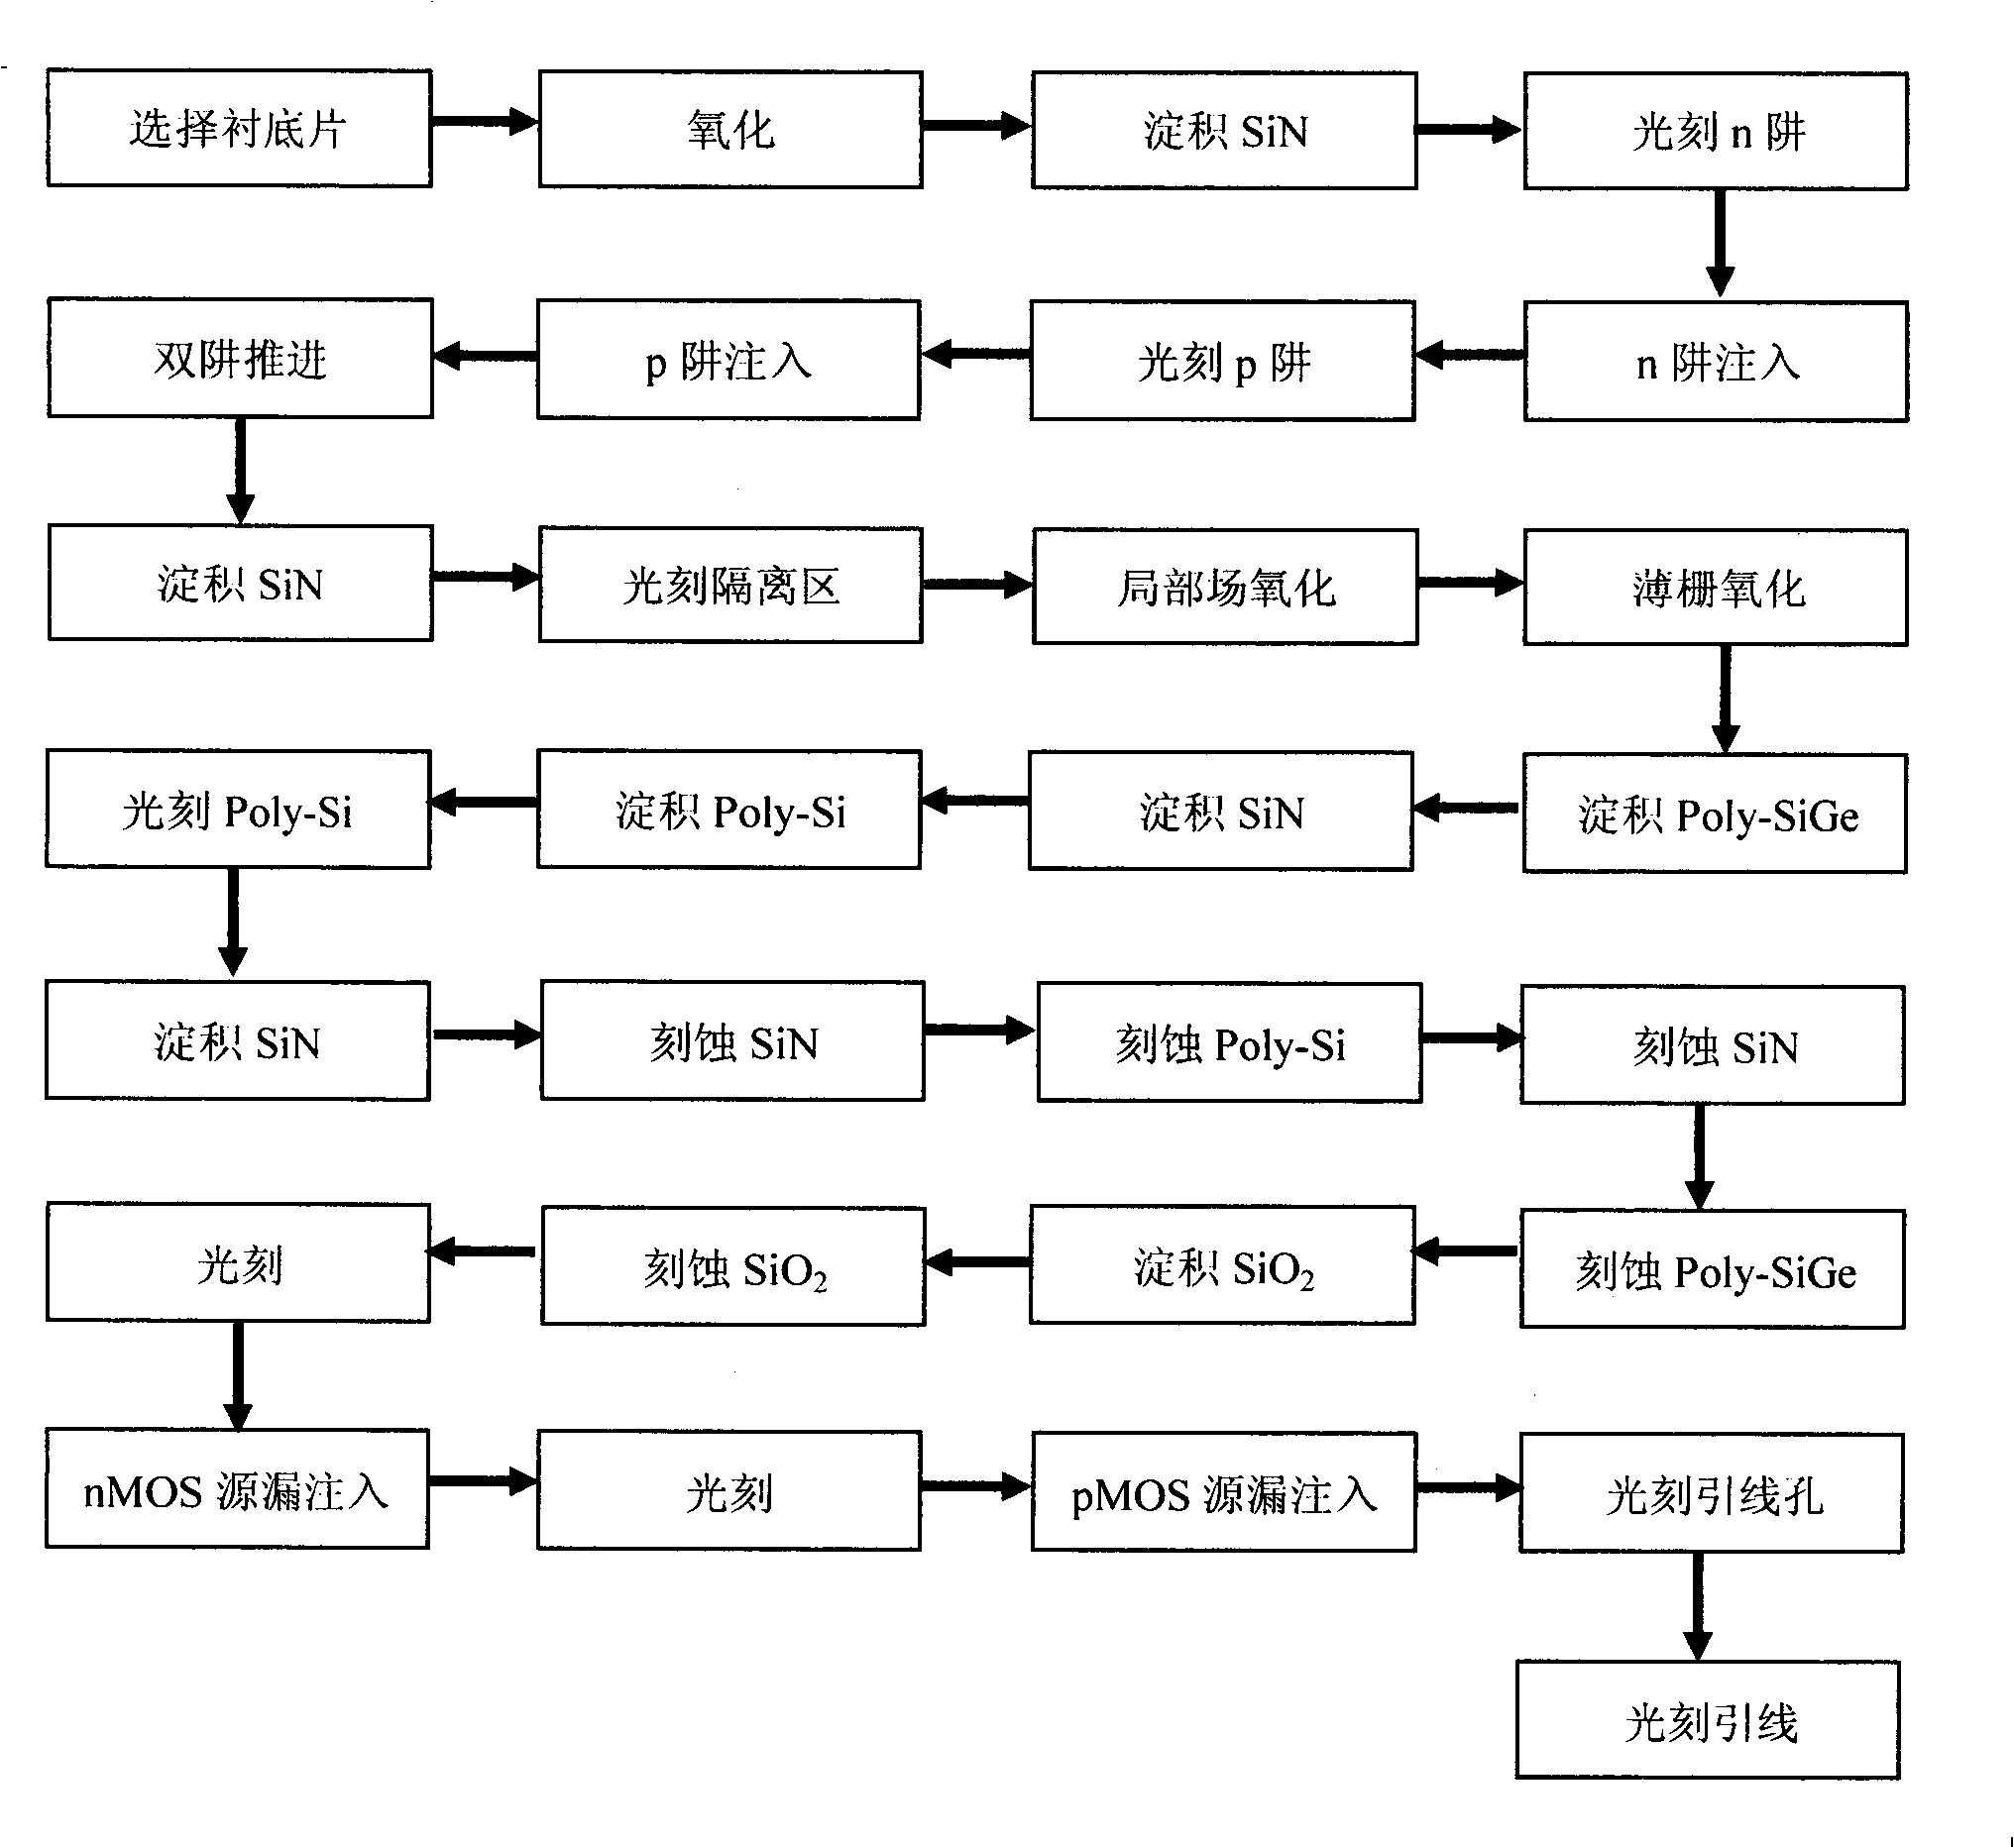 Method for preparing polycrystal SiGe gate nano CMOS integrated circuit by SiN masking technique